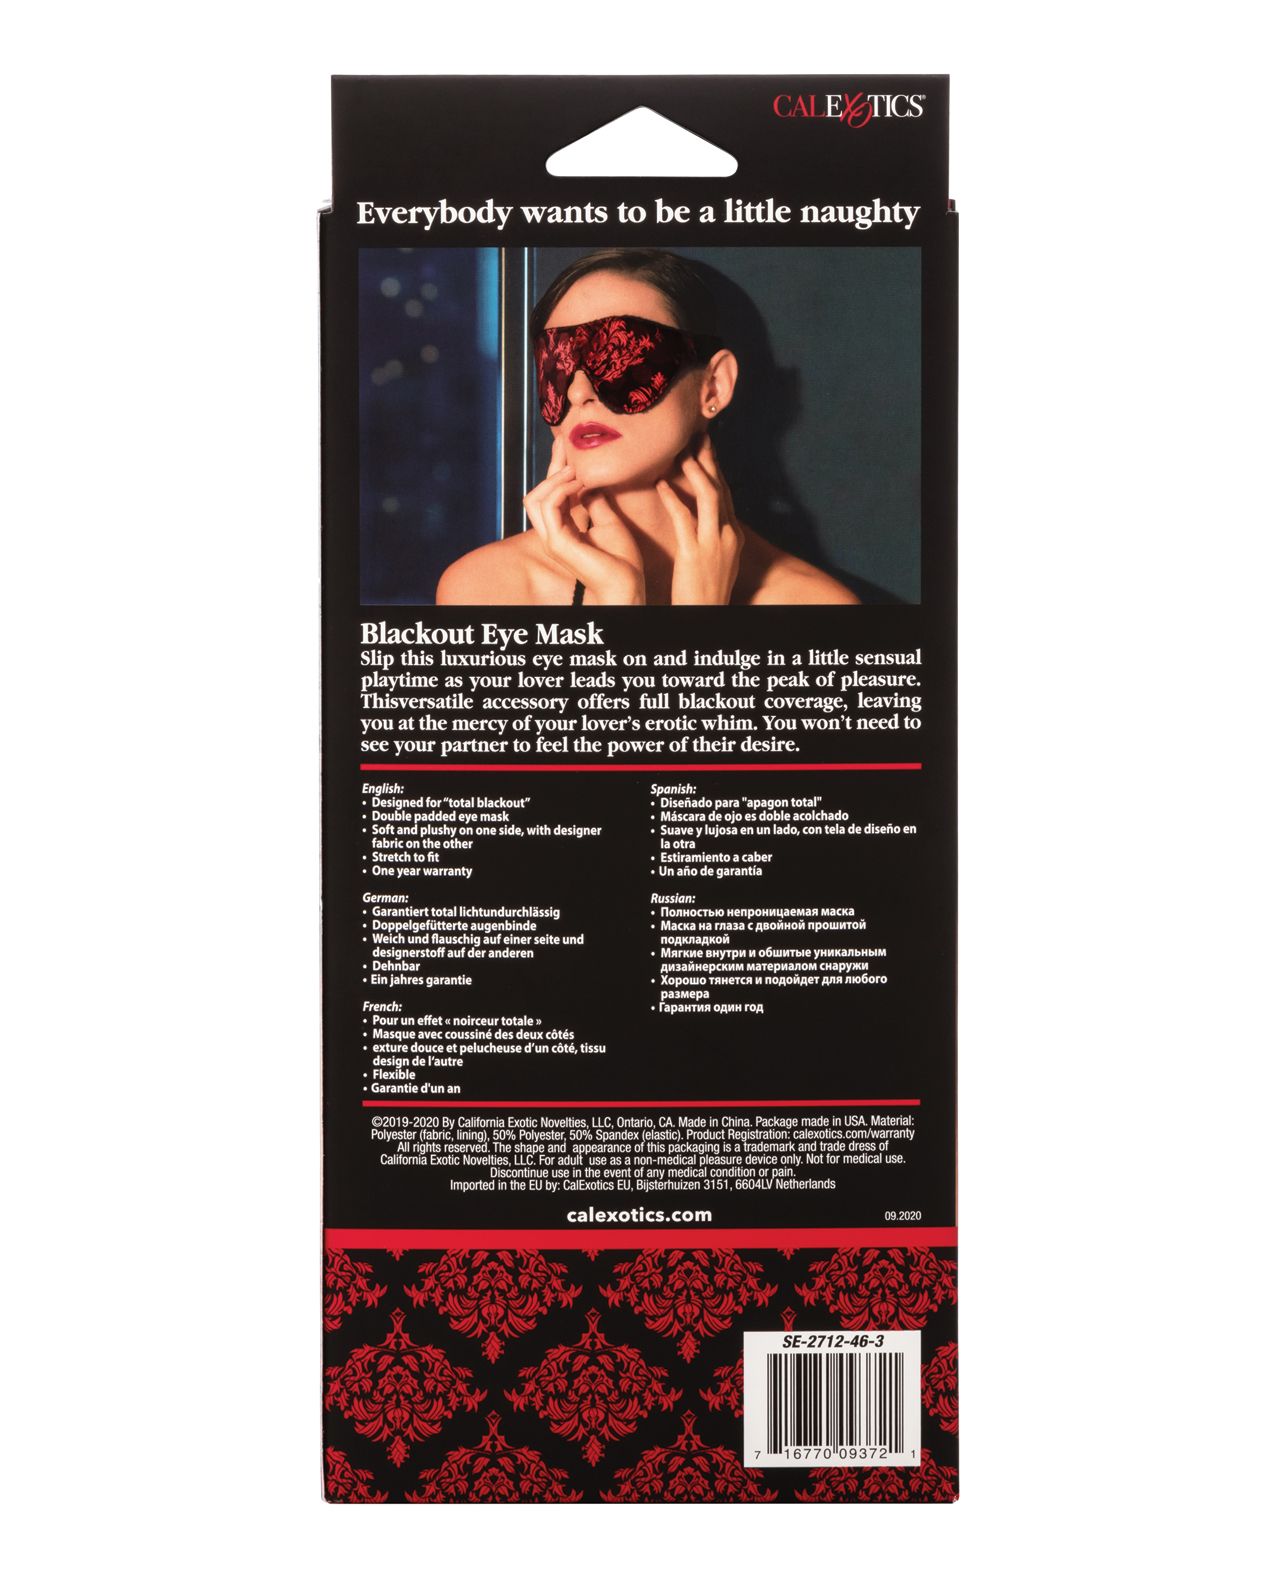 Photo of the back of the box for the  Scandal Blackout Eye Mask (red/black) from CalExotics.